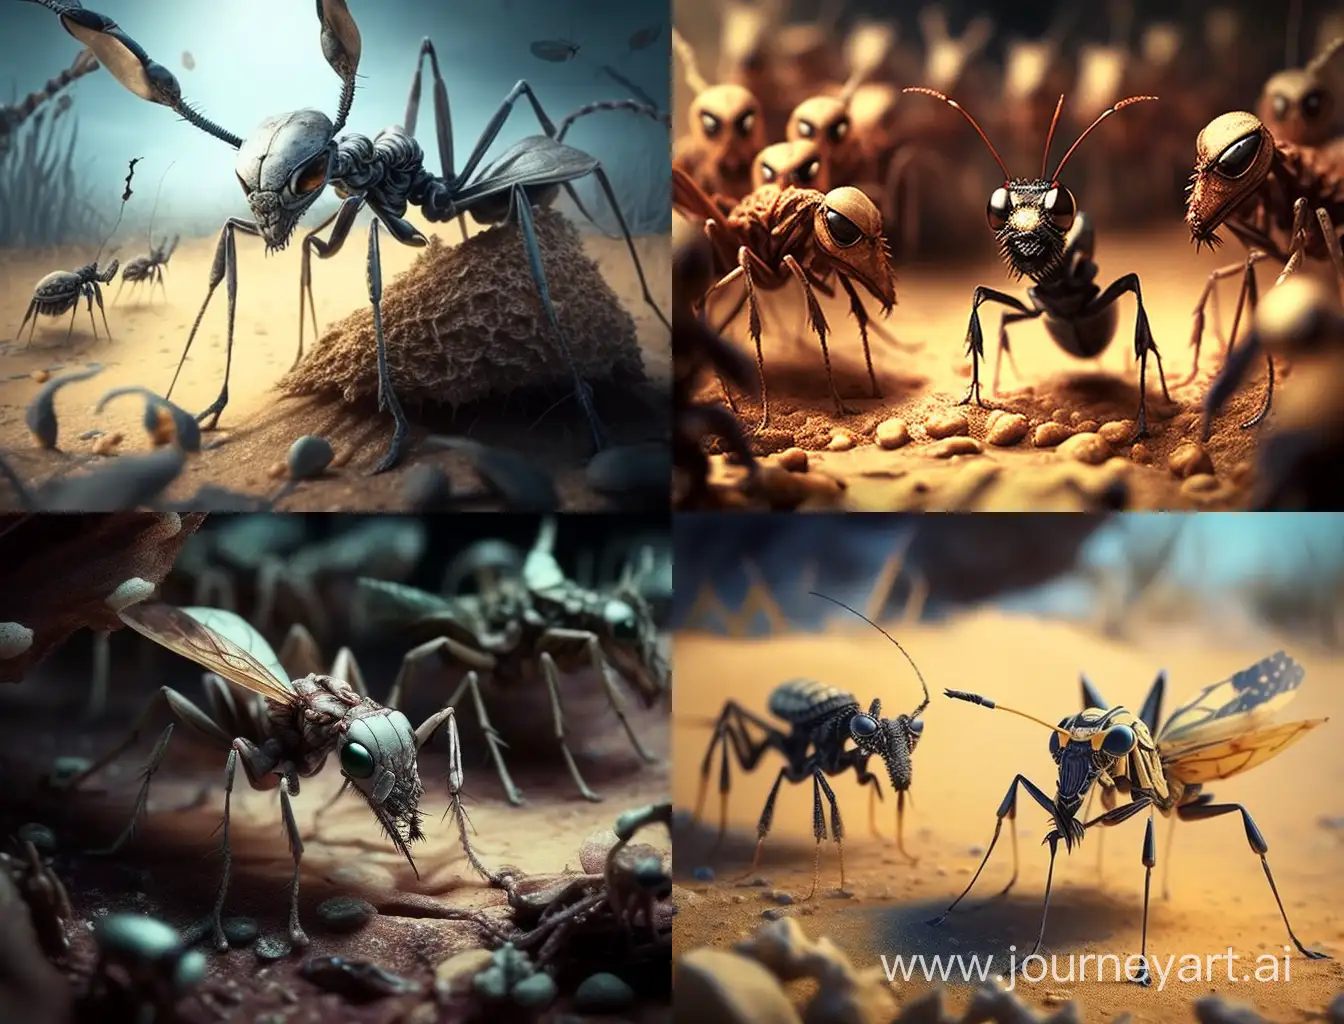 Ants-and-Locusts-Faceoff-in-Intense-Battle